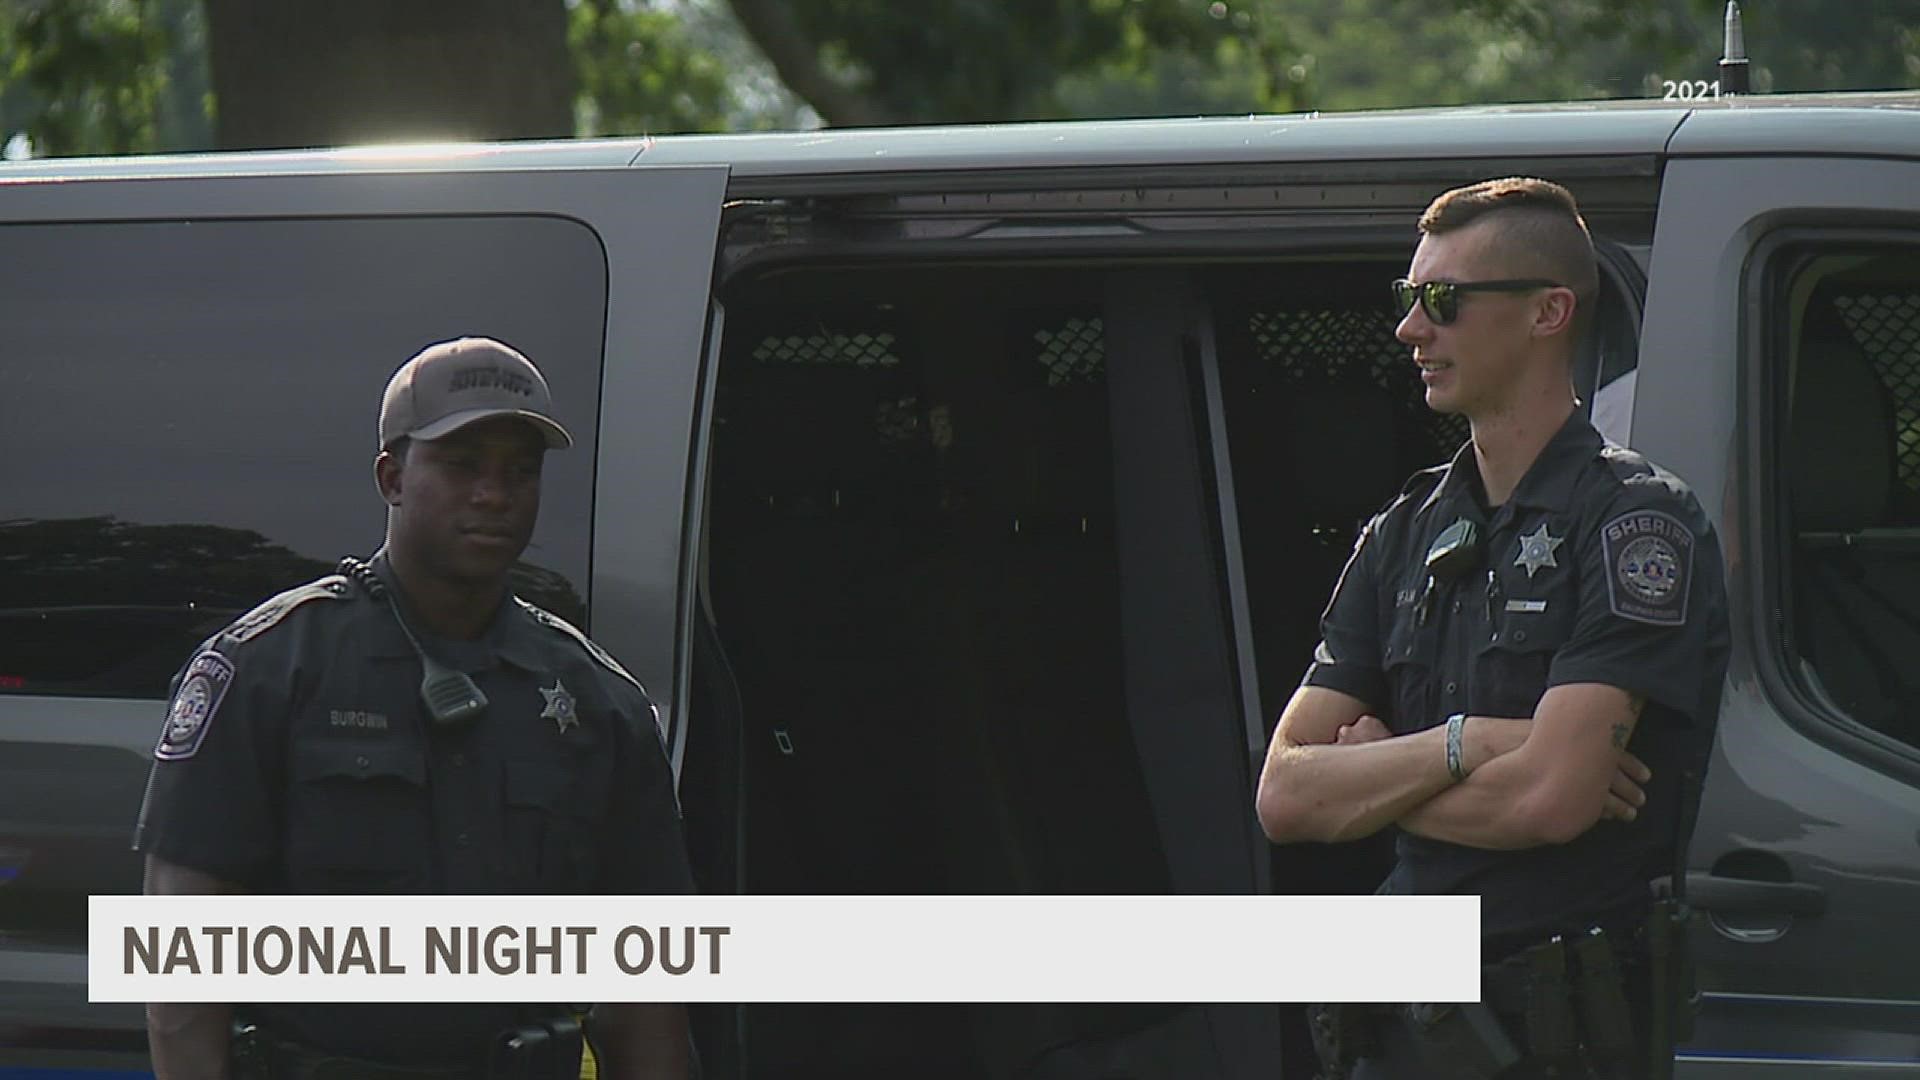 Police departments across the country will tonight be taking part in National Night Out, an annual community-building campaign held across the United States.